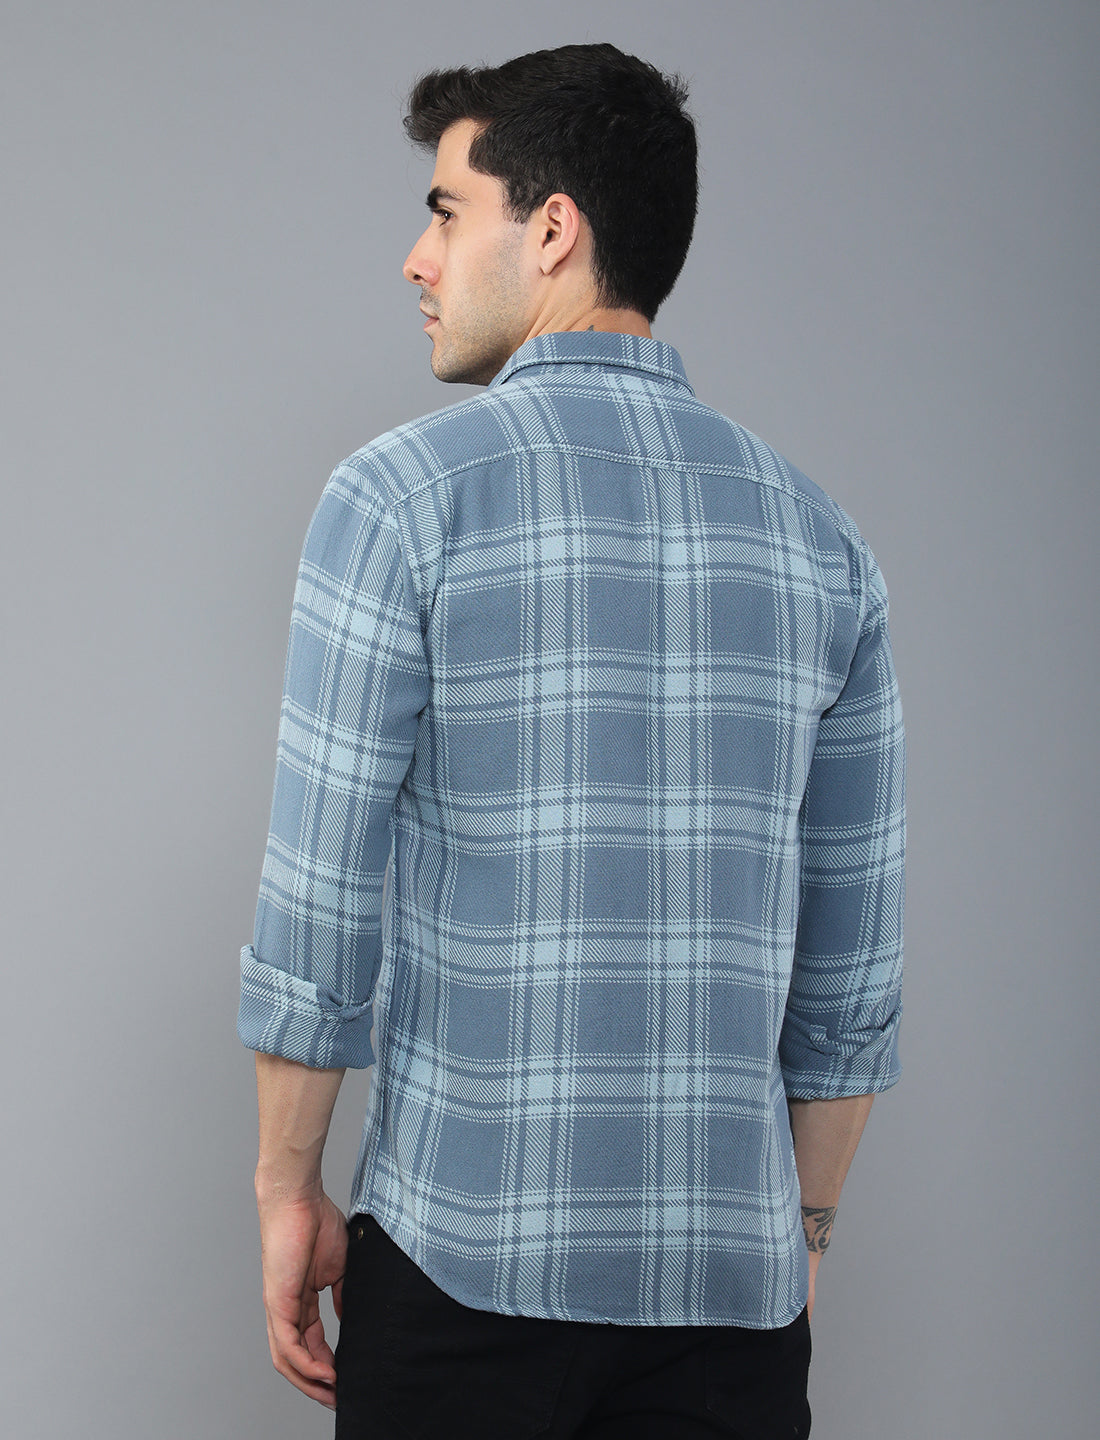 Blue Waved Cotton Shirt With Double Pockets For Men